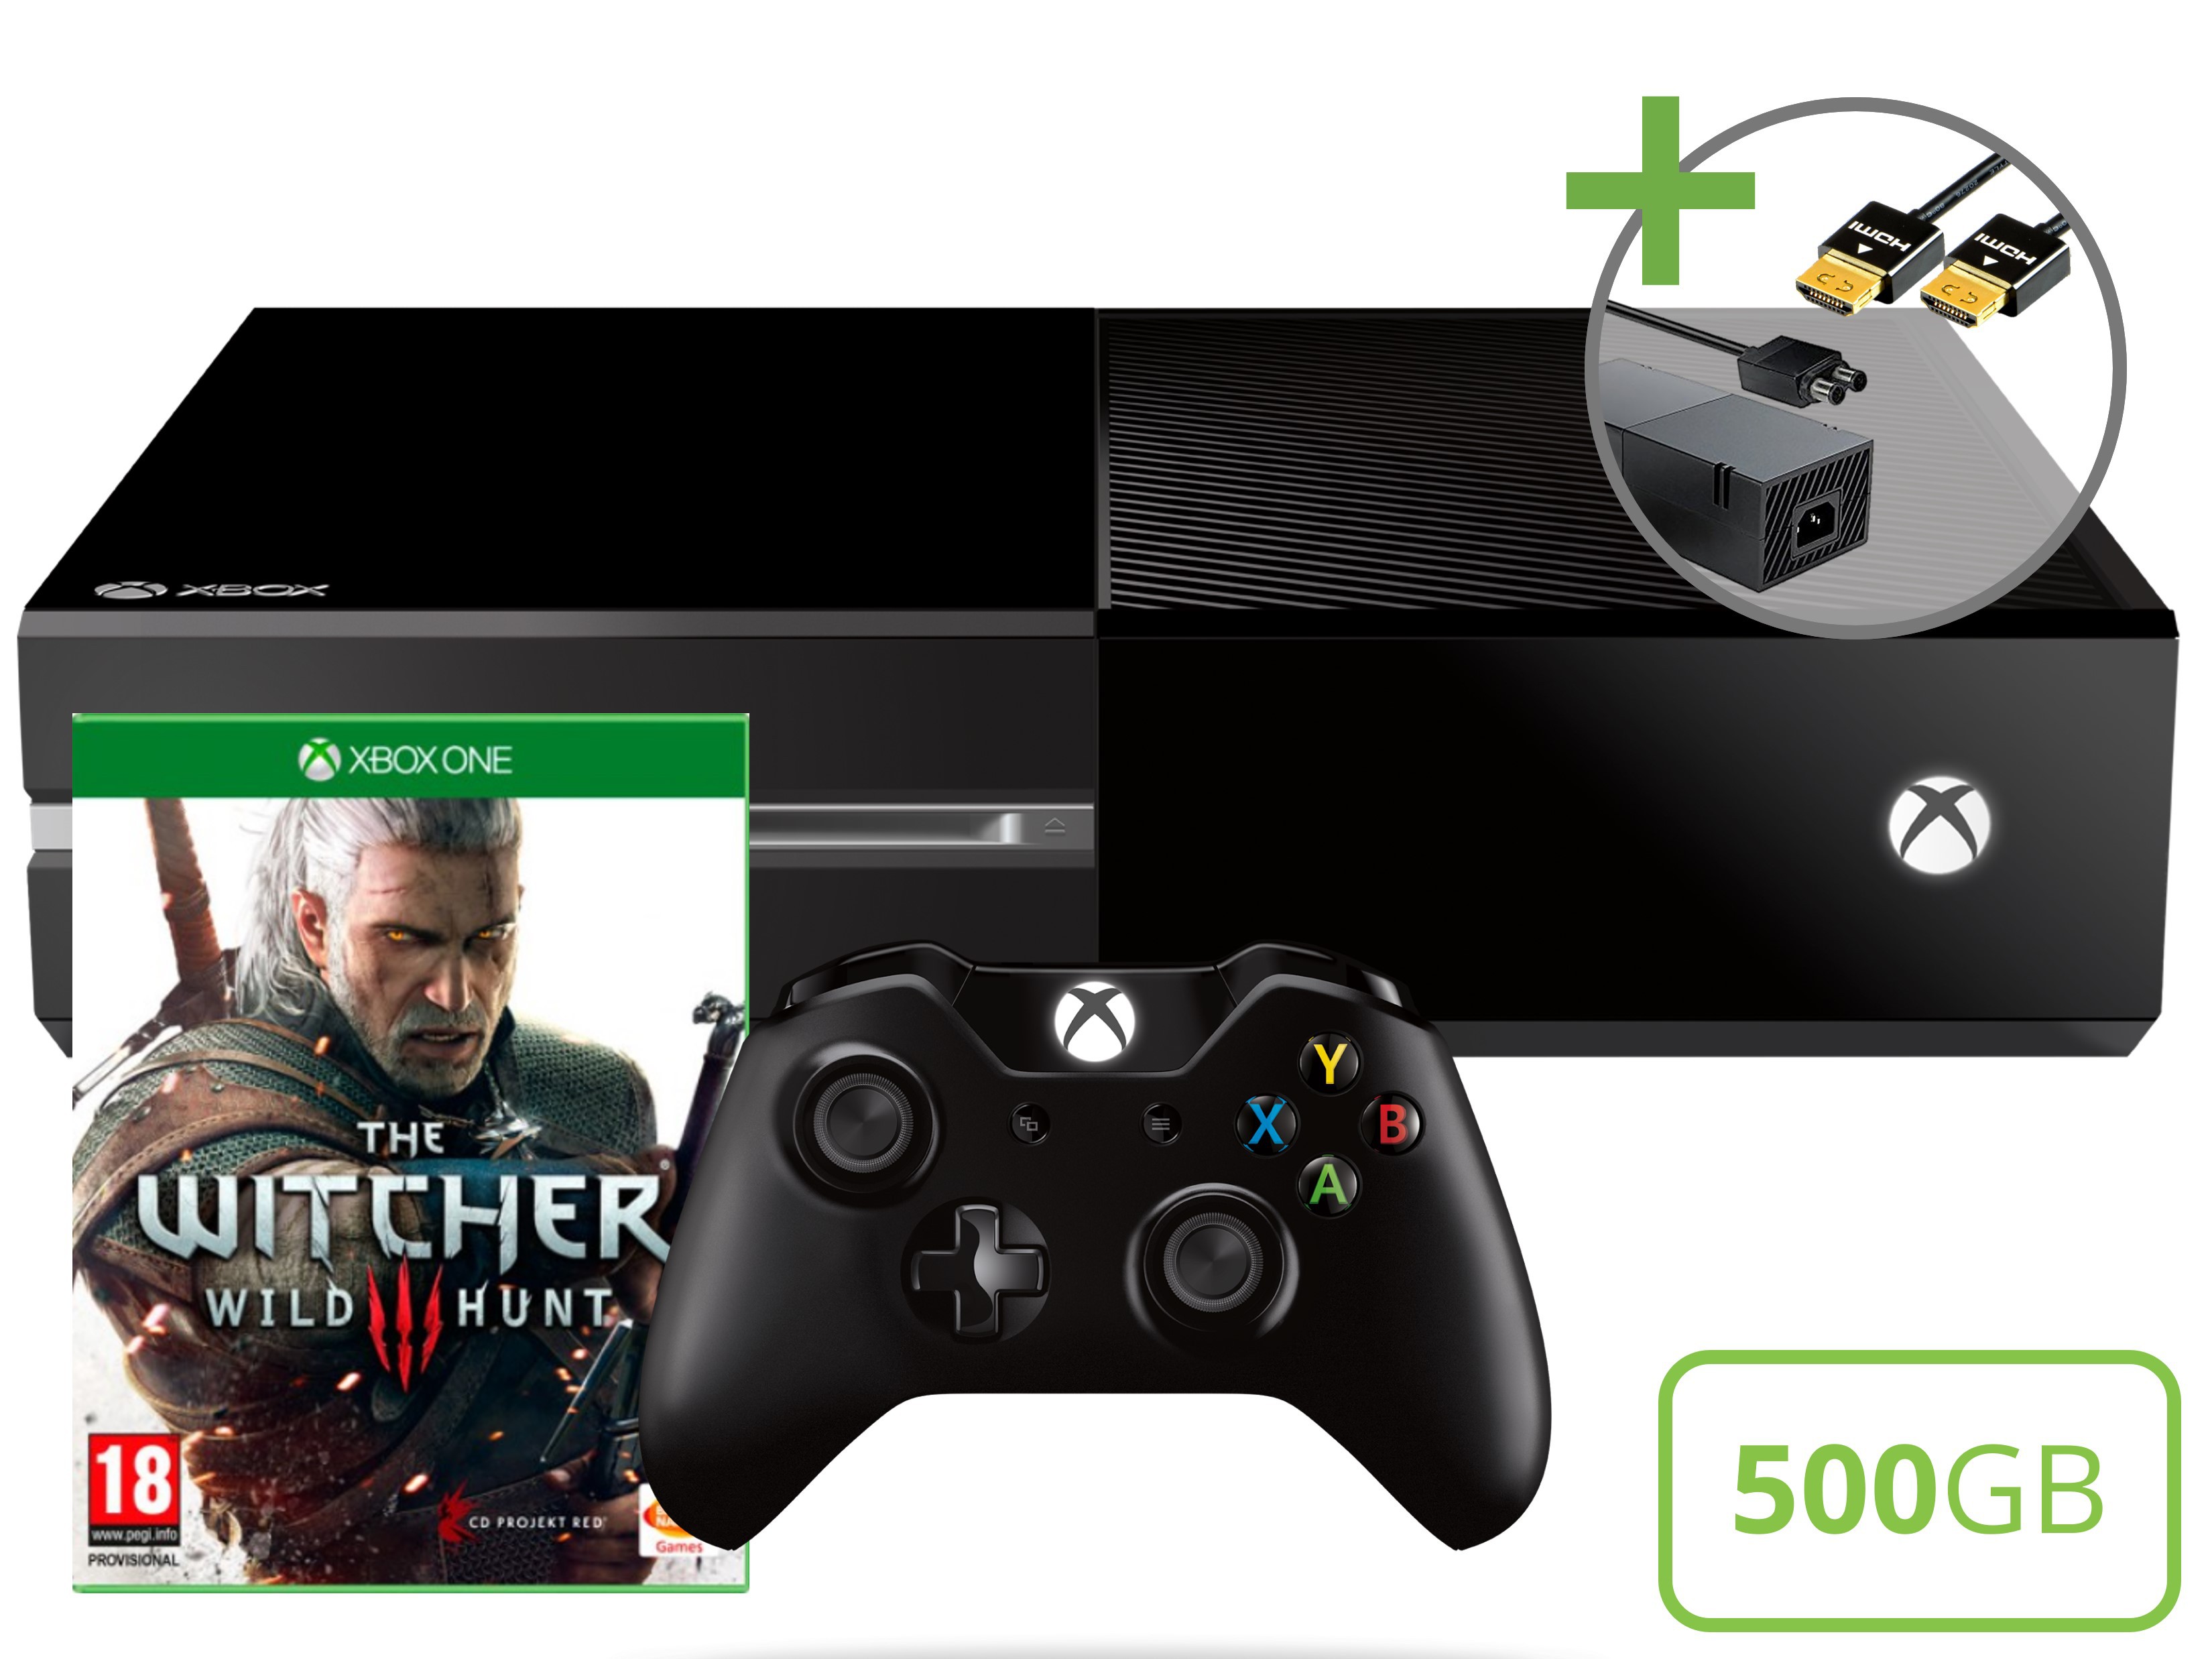 Microsoft Xbox One Starter Pack - 500GB The Witcher 3 Wild Hunt Edition Kopen | Xbox One Hardware